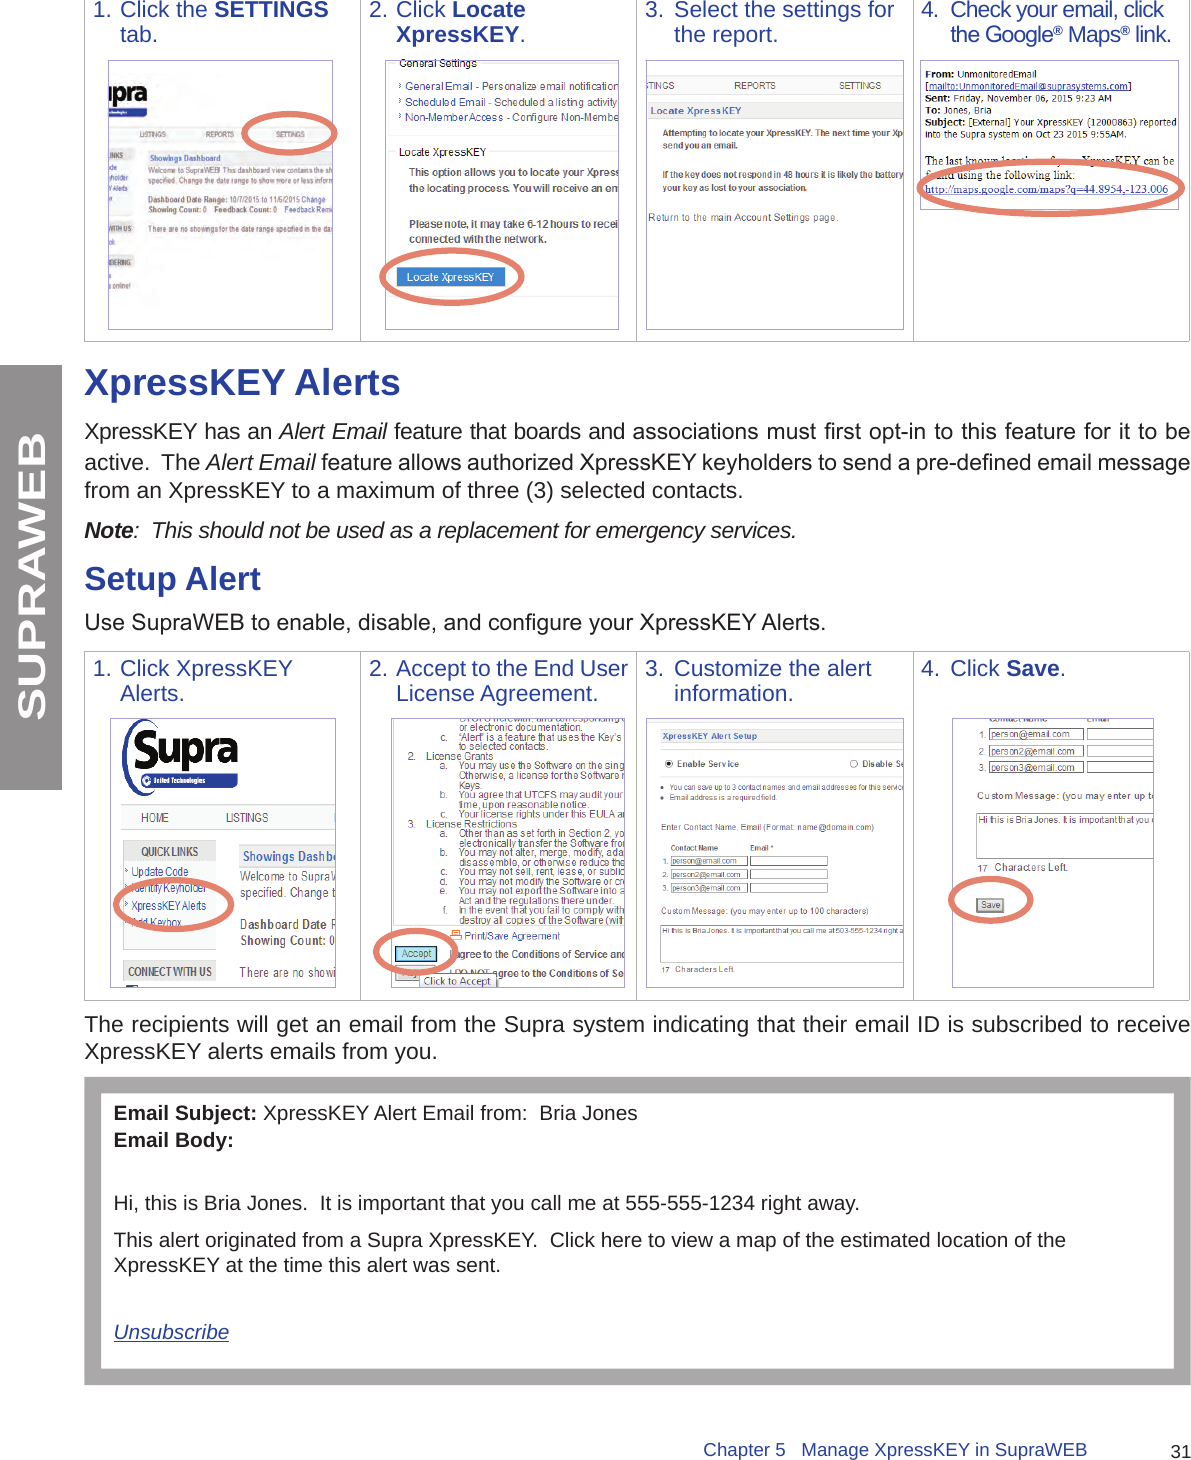 31Chapter 5   Manage XpressKEY in SupraWEBSUPRAWEB1. Click the SETTINGS tab. 2. Click Locate XpressKEY.3.  Select the settings for the report.  4.  Check your email, click the Google® Maps® link.XpressKEY AlertsXpressKEY has an Alert Email feature that boards and associations must rst opt-in to this feature for it to be active.  The Alert Email feature allows authorized XpressKEY keyholders to send a pre-dened email message from an XpressKEY to a maximum of three (3) selected contacts.  Note:  This should not be used as a replacement for emergency services.Setup AlertUse SupraWEB to enable, disable, and congure your XpressKEY Alerts. 1. Click XpressKEY Alerts. 2. Accept to the End User License Agreement. 3.  Customize the alert information.  4.  Click Save.The recipients will get an email from the Supra system indicating that their email ID is subscribed to receive XpressKEY alerts emails from you.Email Subject: XpressKEY Alert Email from:  Bria JonesEmail Body:Hi, this is Bria Jones.  It is important that you call me at 555-555-1234 right away.This alert originated from a Supra XpressKEY.  Click here to view a map of the estimated location of the XpressKEY at the time this alert was sent.Unsubscribe